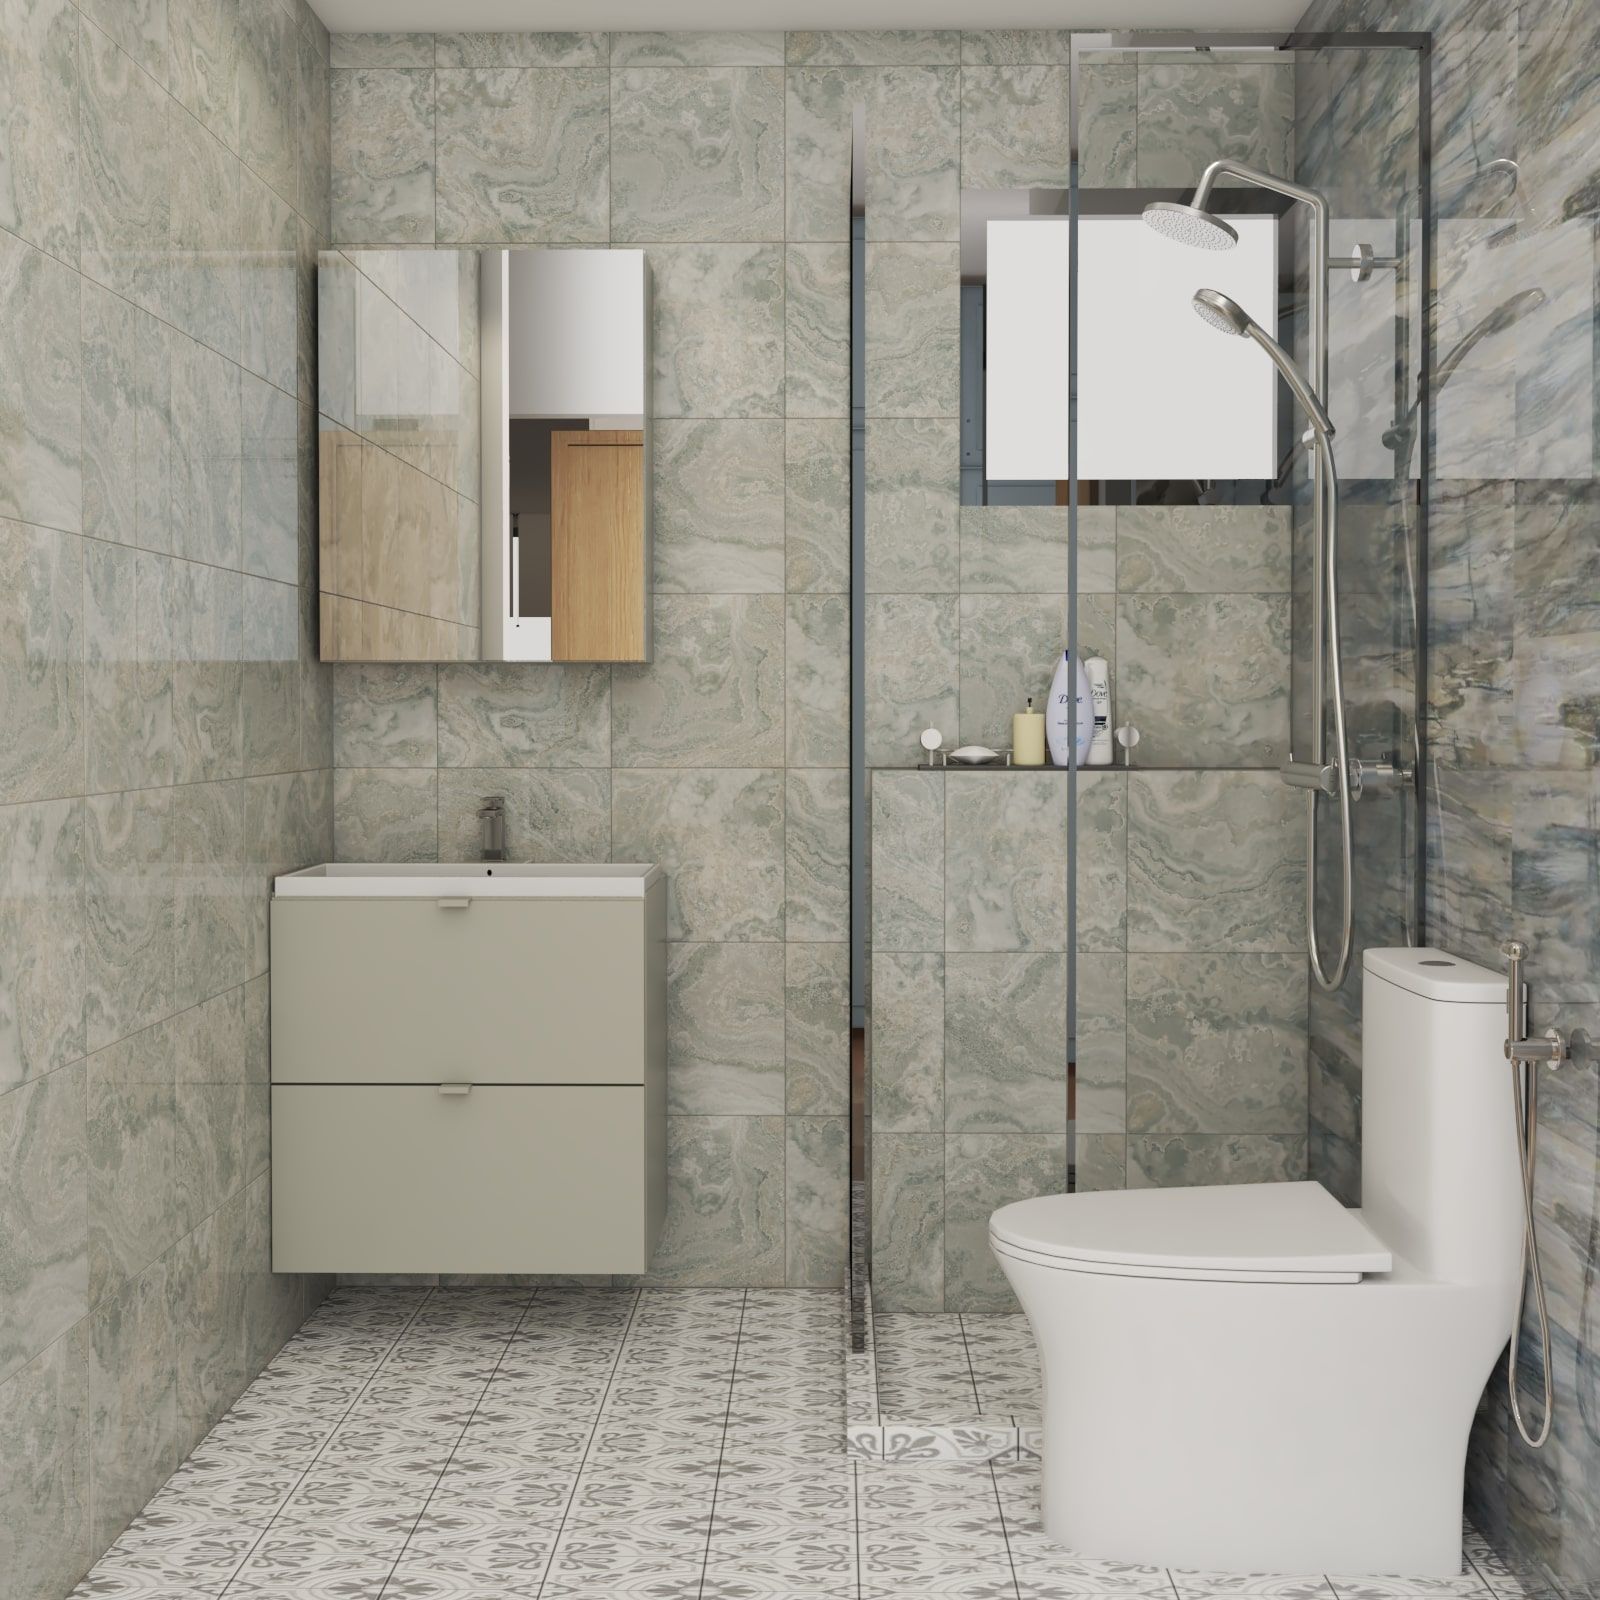 Contemporary Styled Compact Bathroom Design